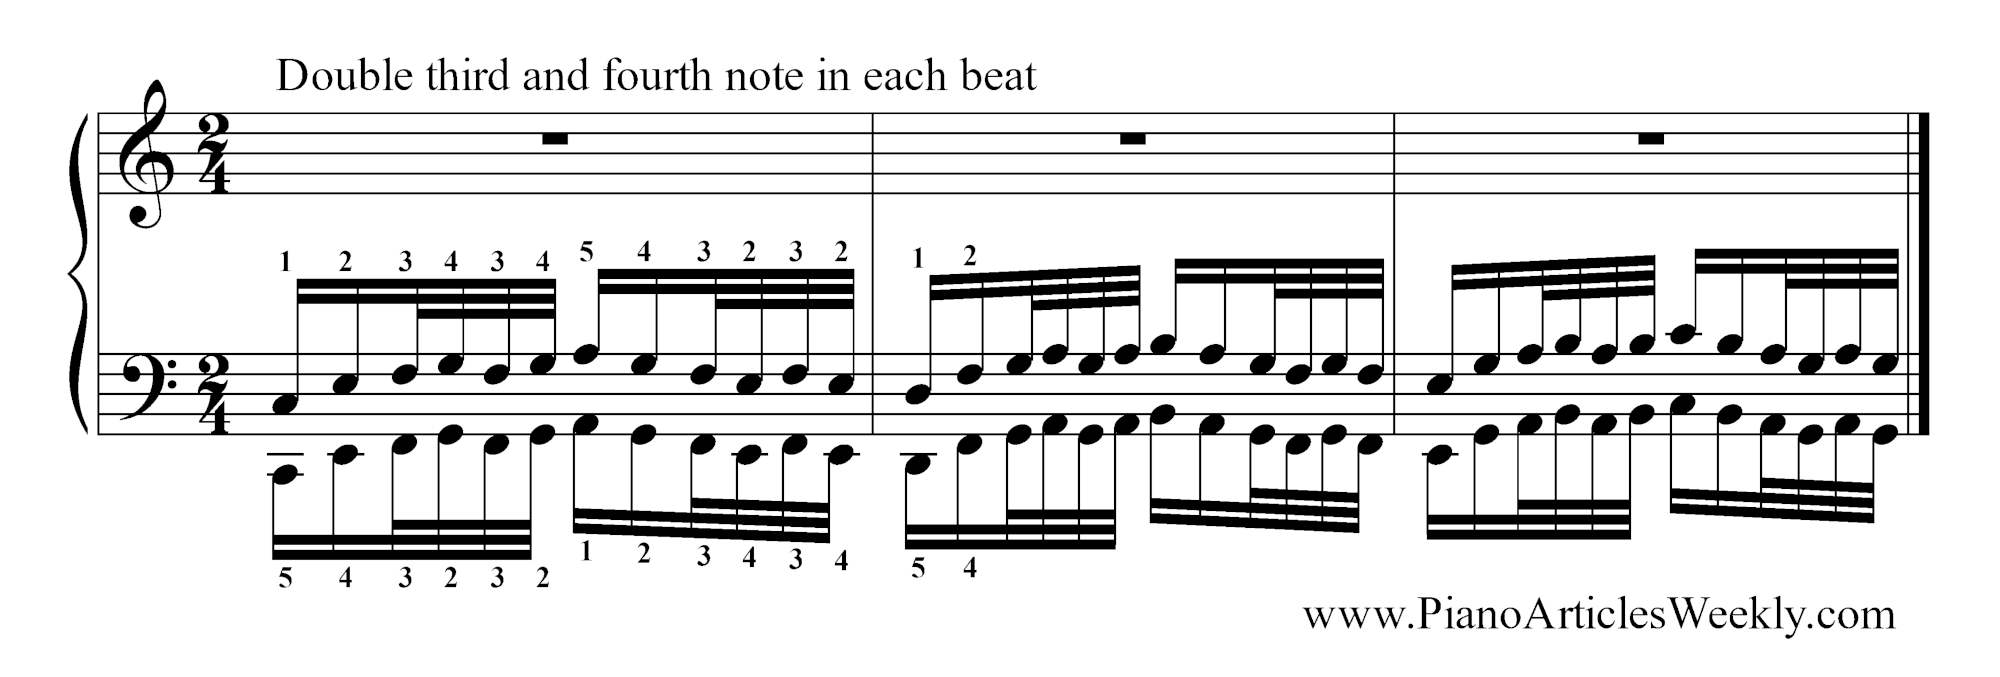 Hanon-Exercise-double-third-and-fourth-note-in-each-beat